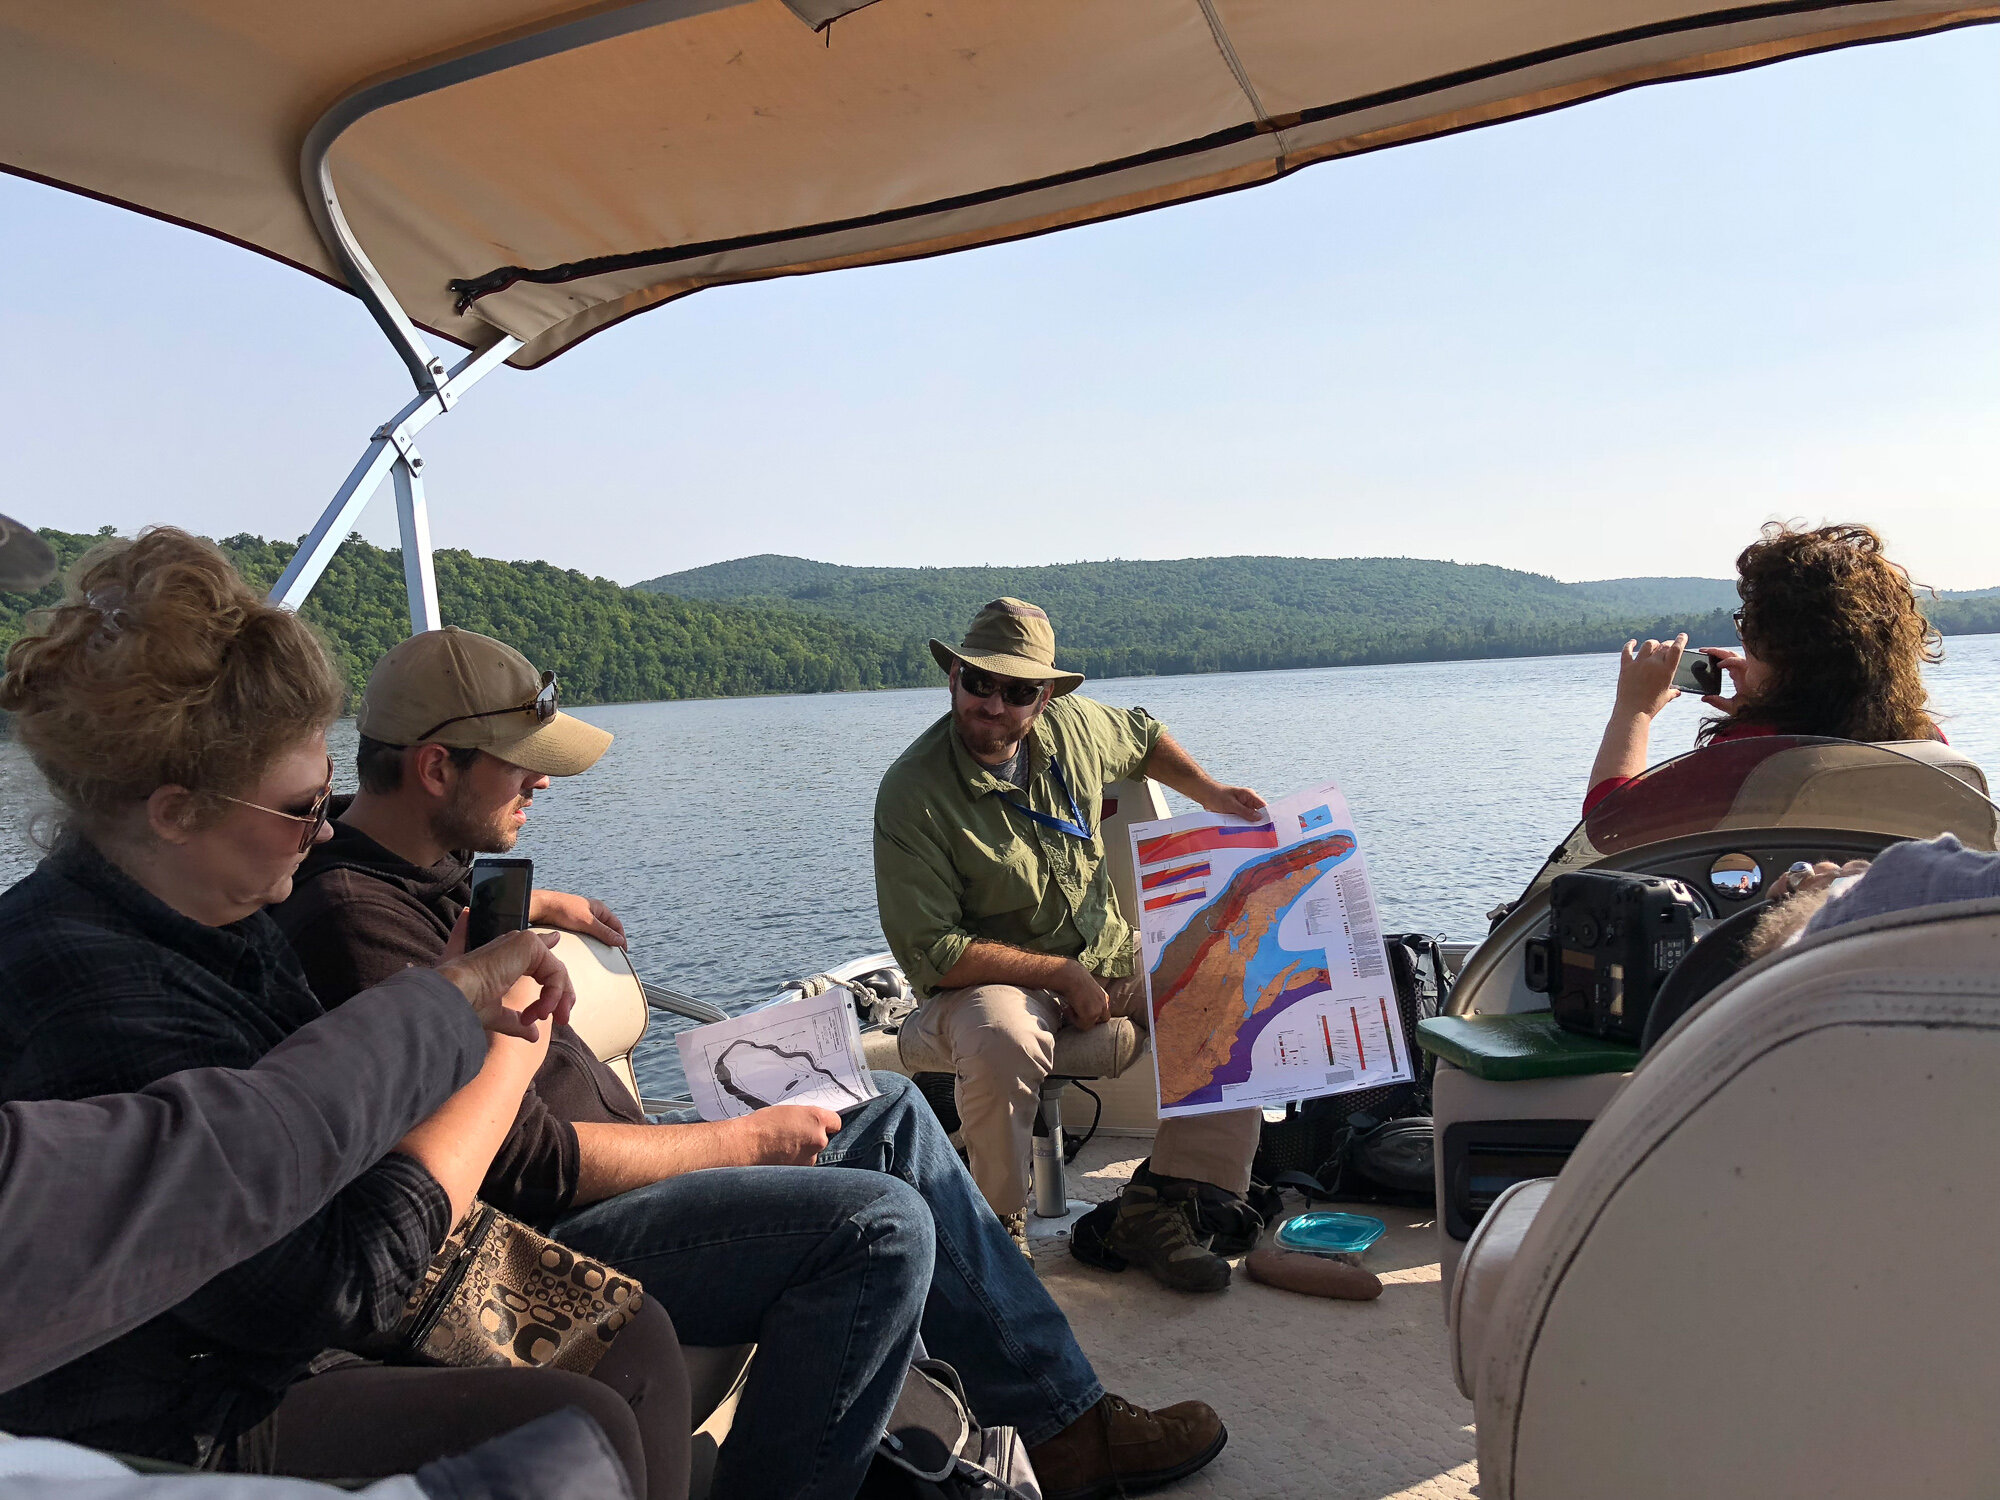   Daniel Lizzadro-McPherson leader of an August 2019 Geoheritage field trip at Gratiot Lake displays a map of the Keweenaw fault line. GLC offers field trips and workshops focused on natural history, geology, and environmental stewardship. Attendees 